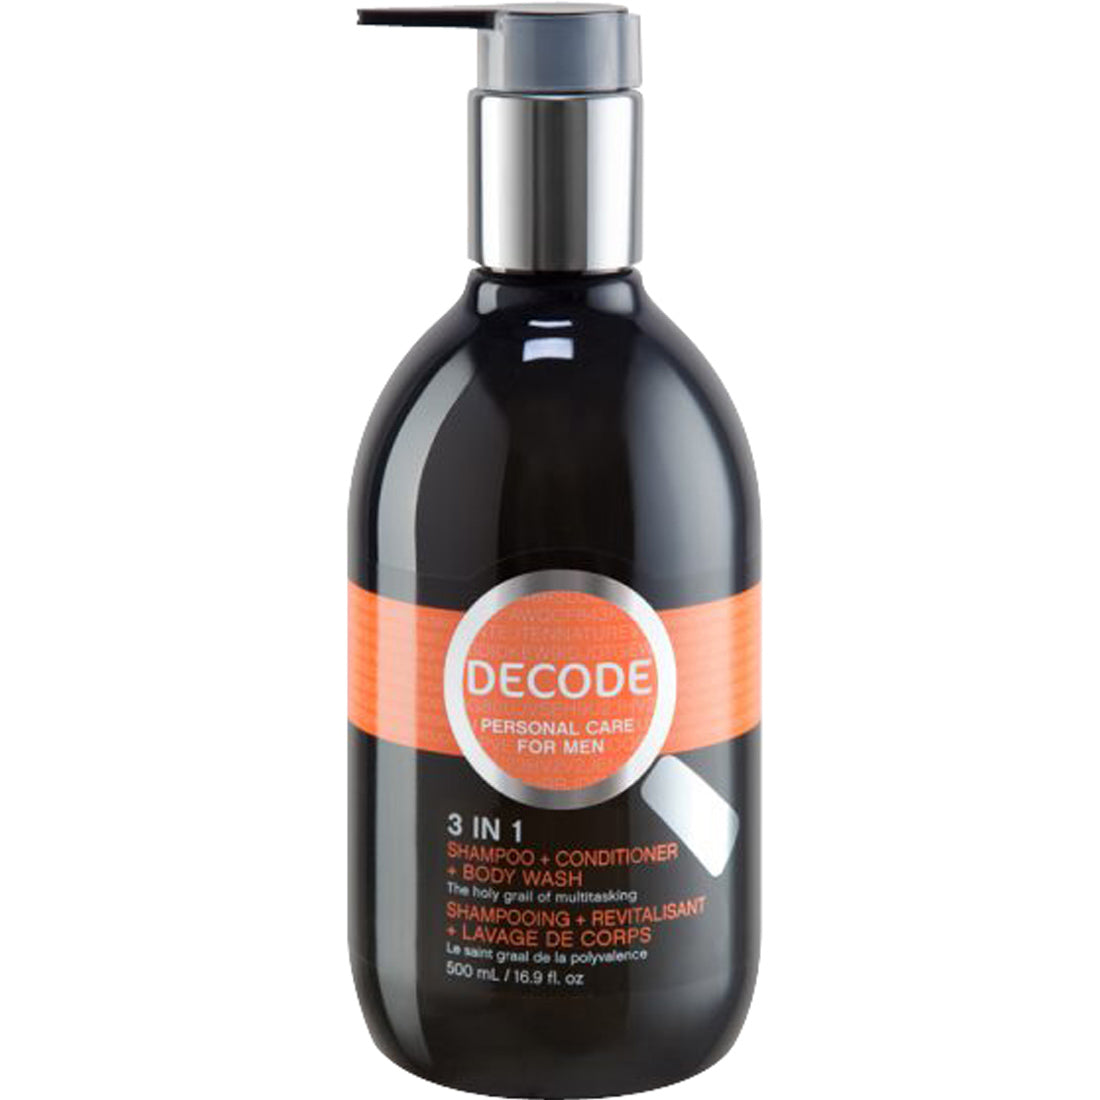 Decode 3 in 1 Shampoo, Body Wash and Conditioner, 500ml